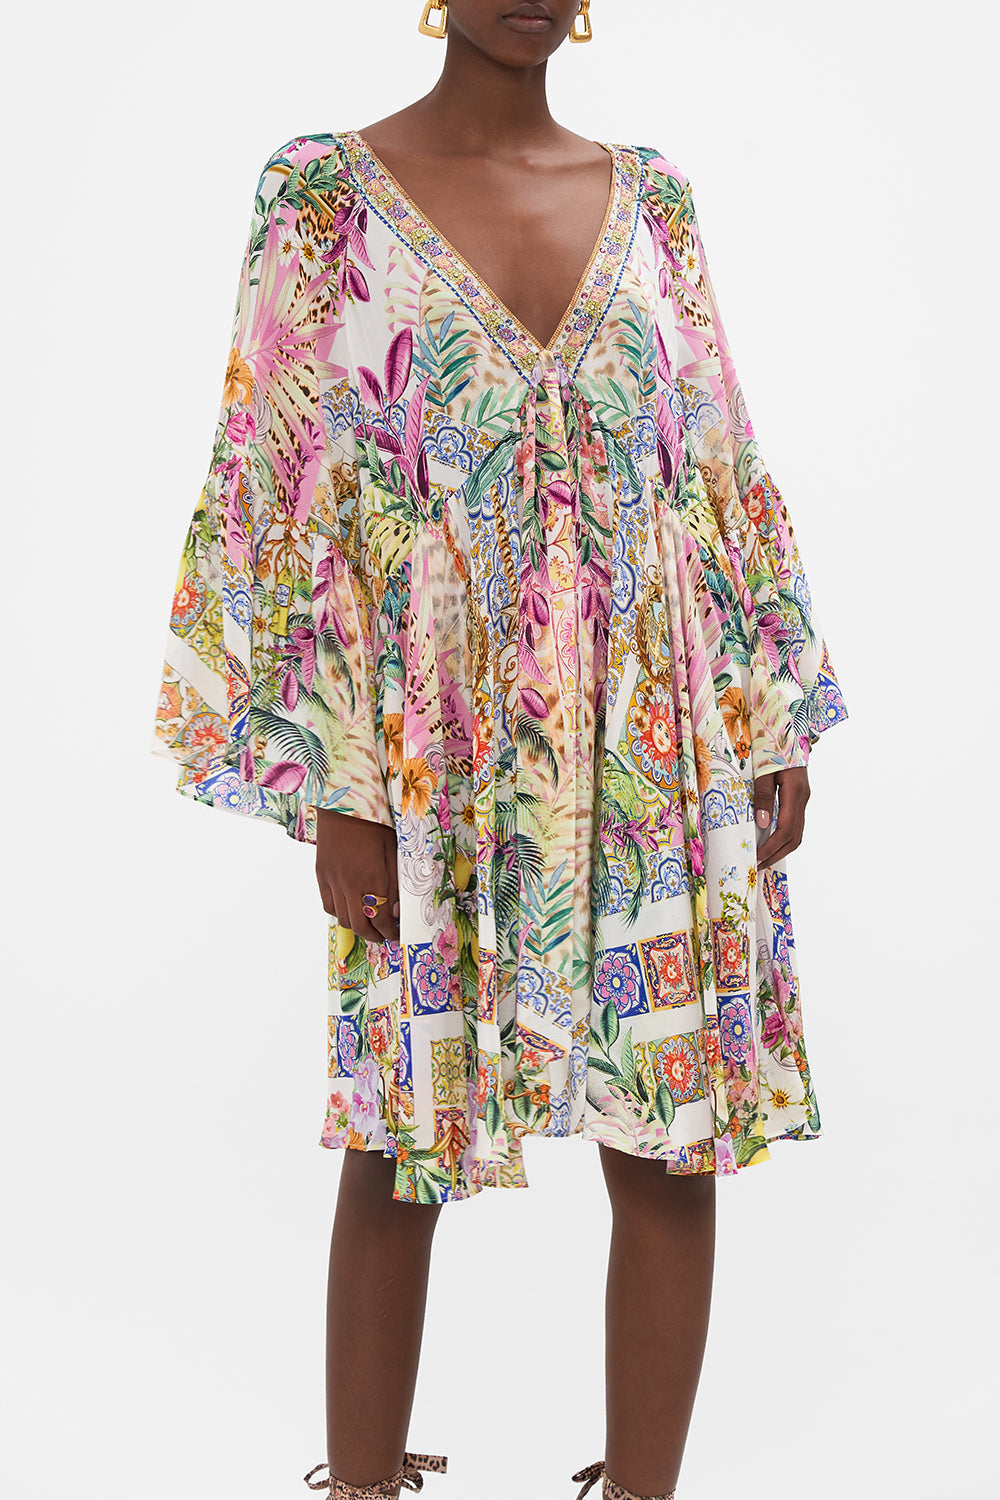 Crop view of model wearing CAMILLA a line floral dress in Flowers Of Neptune print